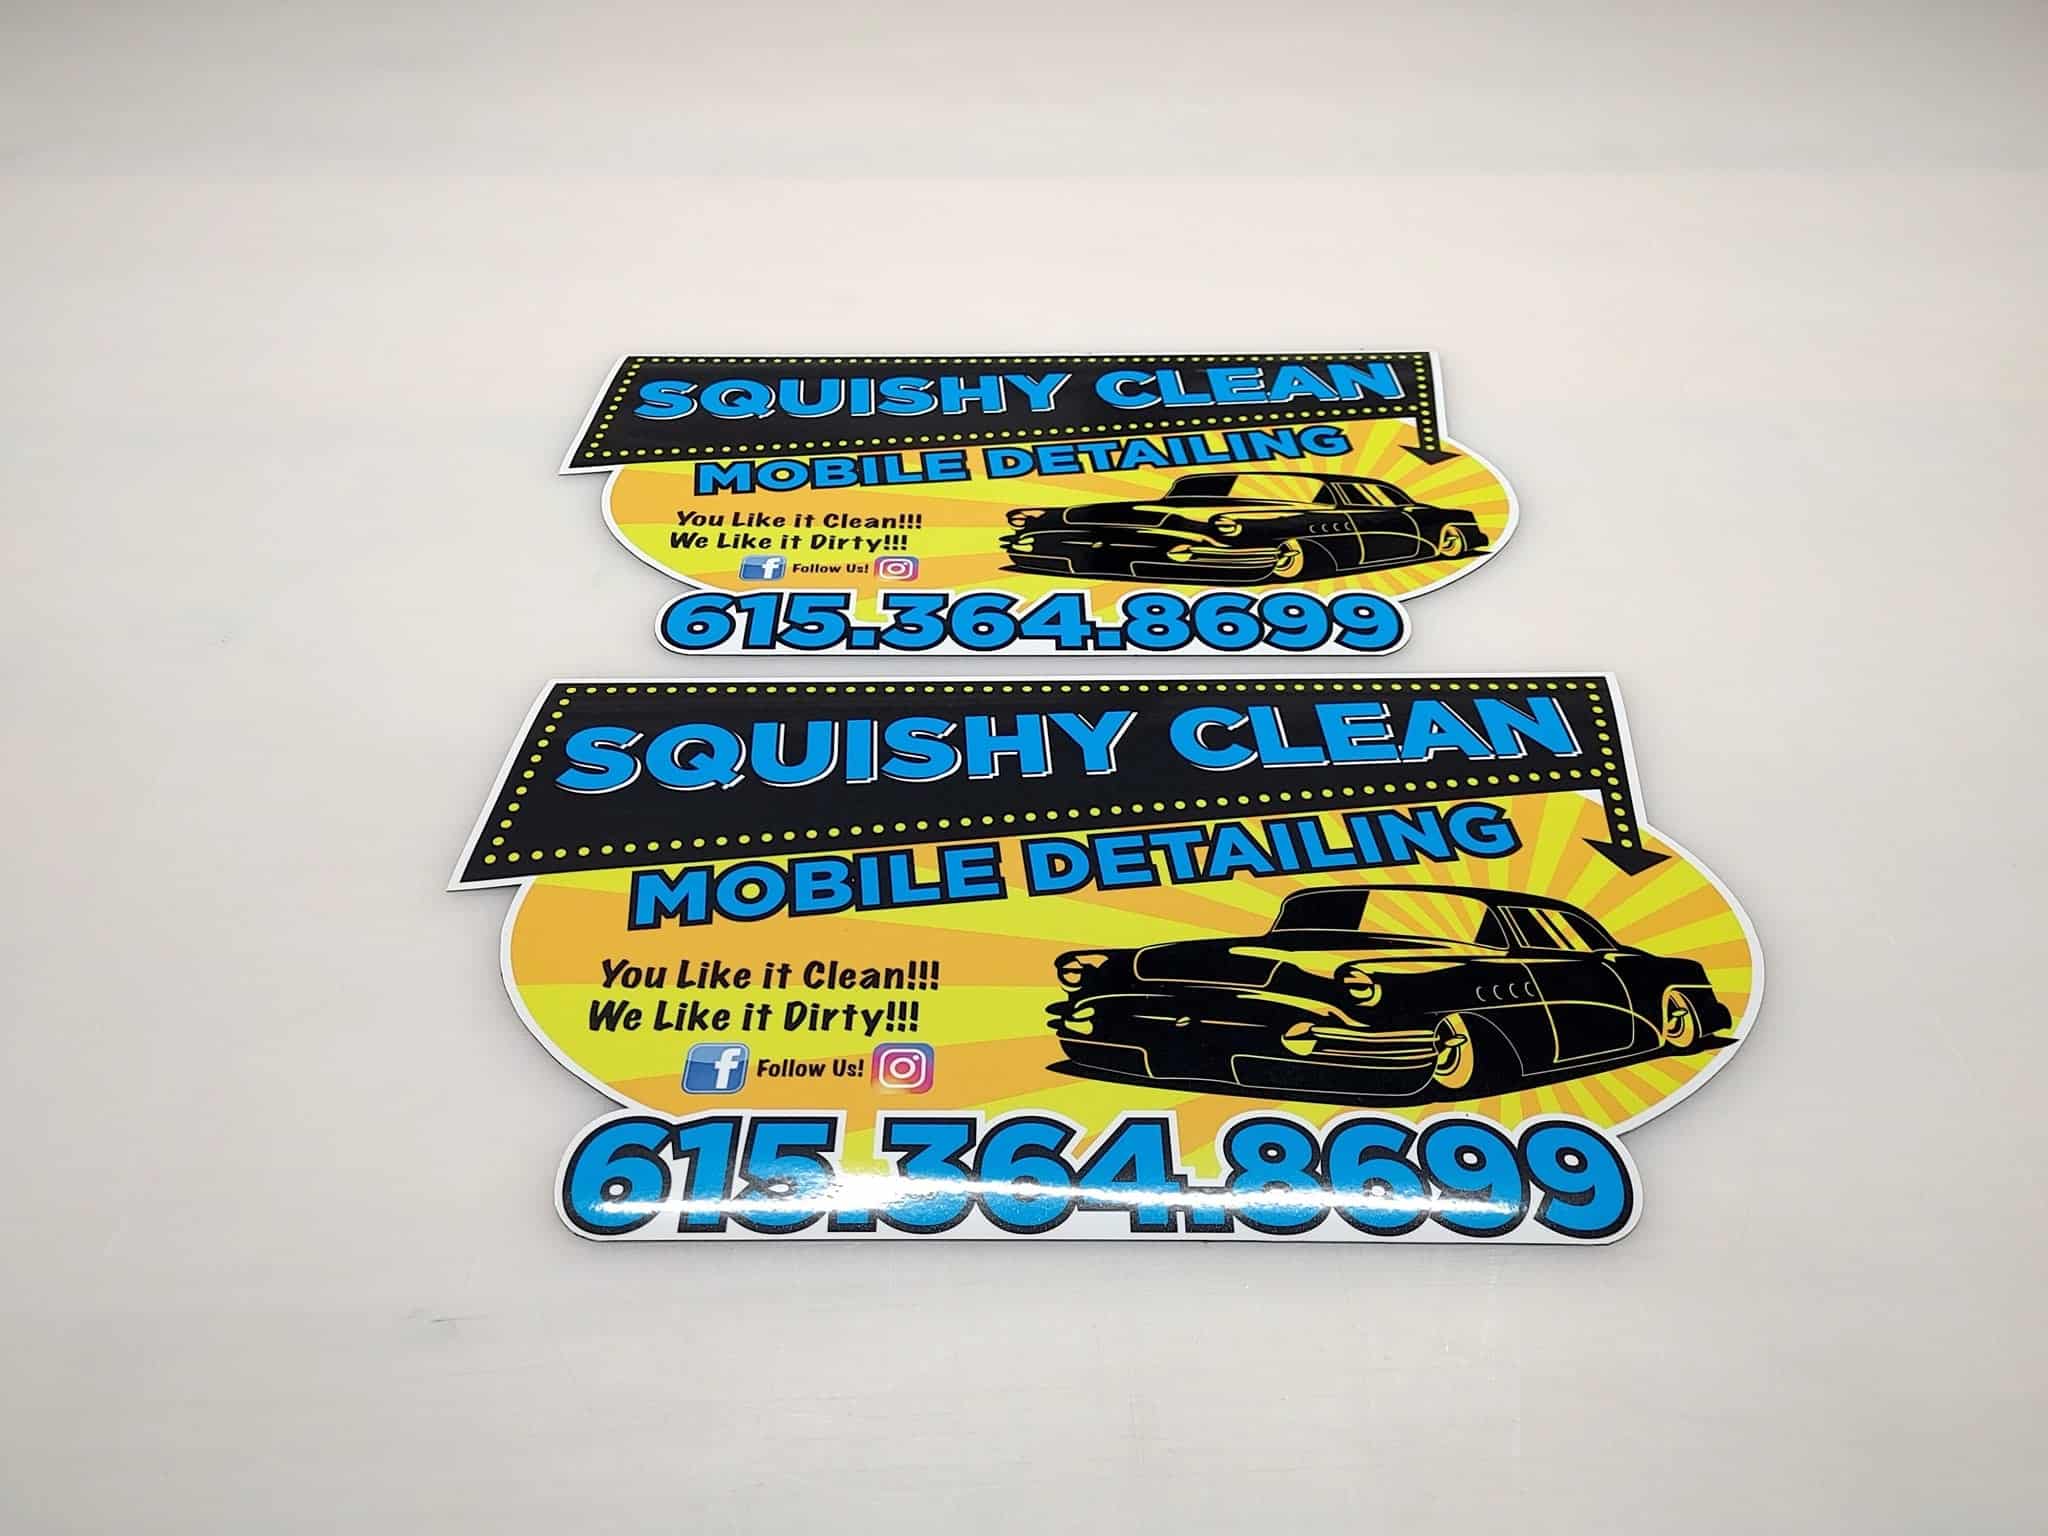 21581- Vehicle Magnets for Squishy Clean Mobile Detailing